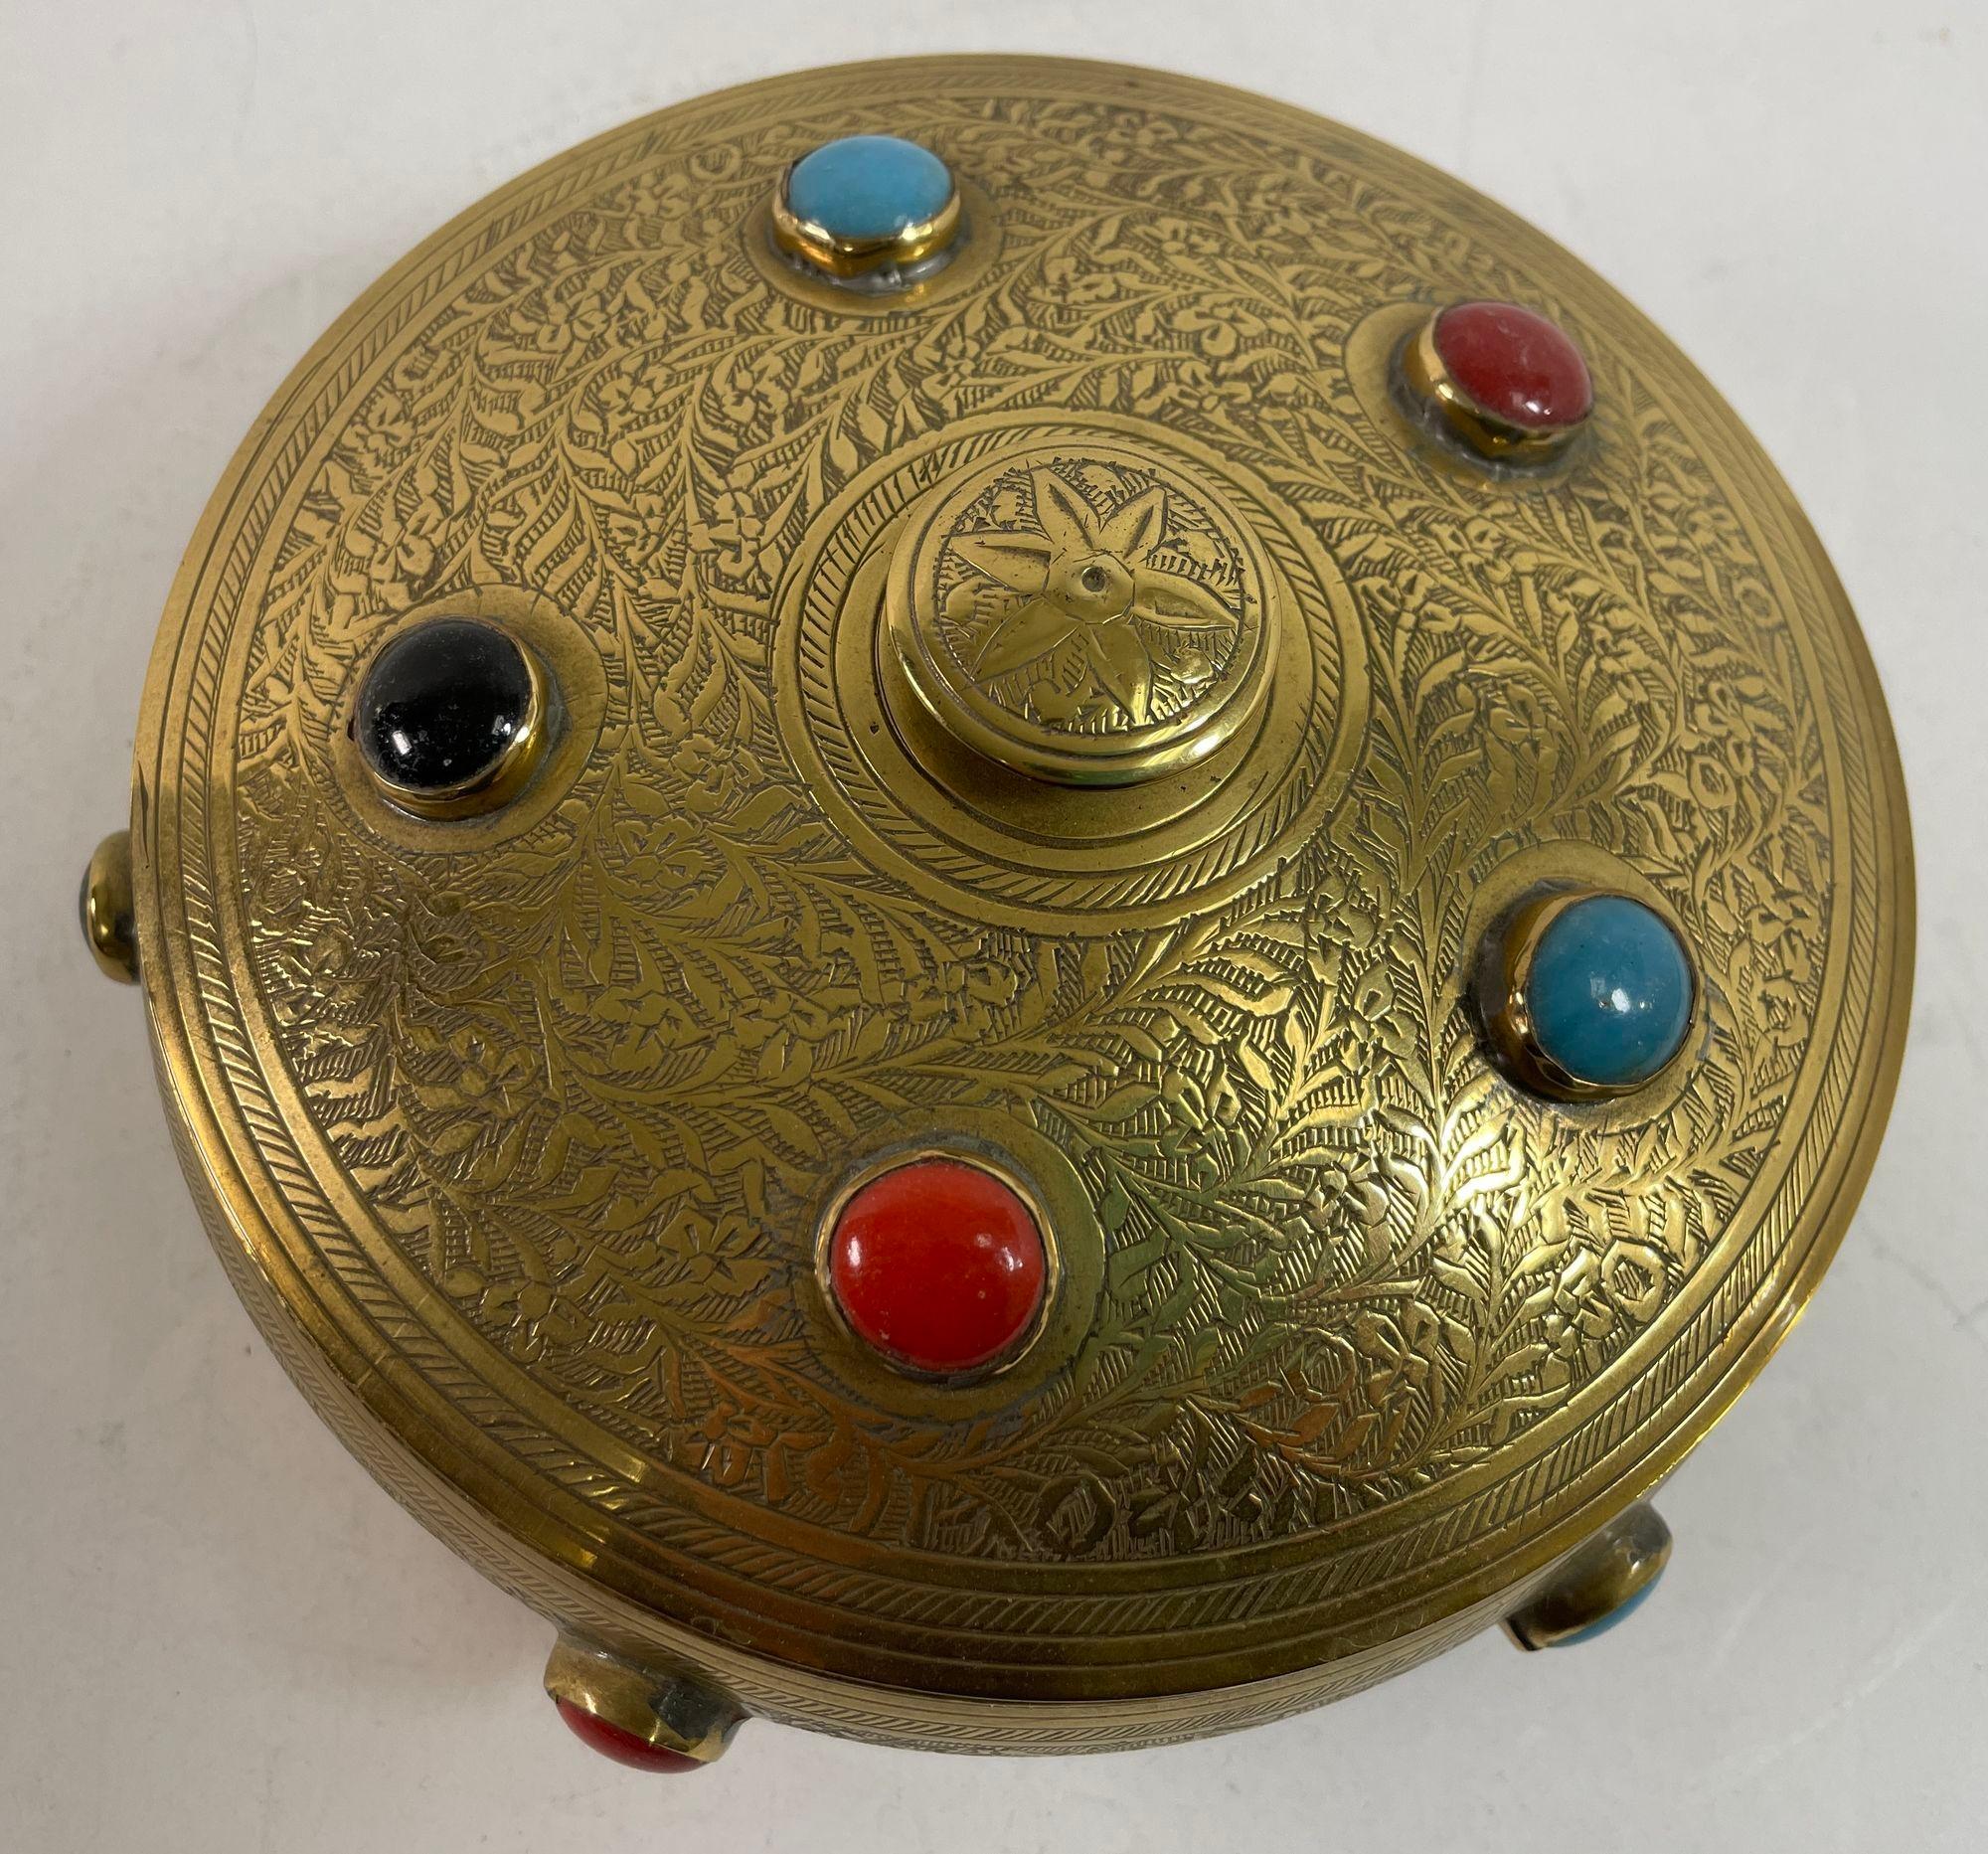 vintage Moroccan brass round trinket box decorated with multicolored jewelled beads in turquoise blue, ruby red, emerald green and onyx black.
handcrafted metal brass box with lid finely and delicately chased with floral and foliage design.
North